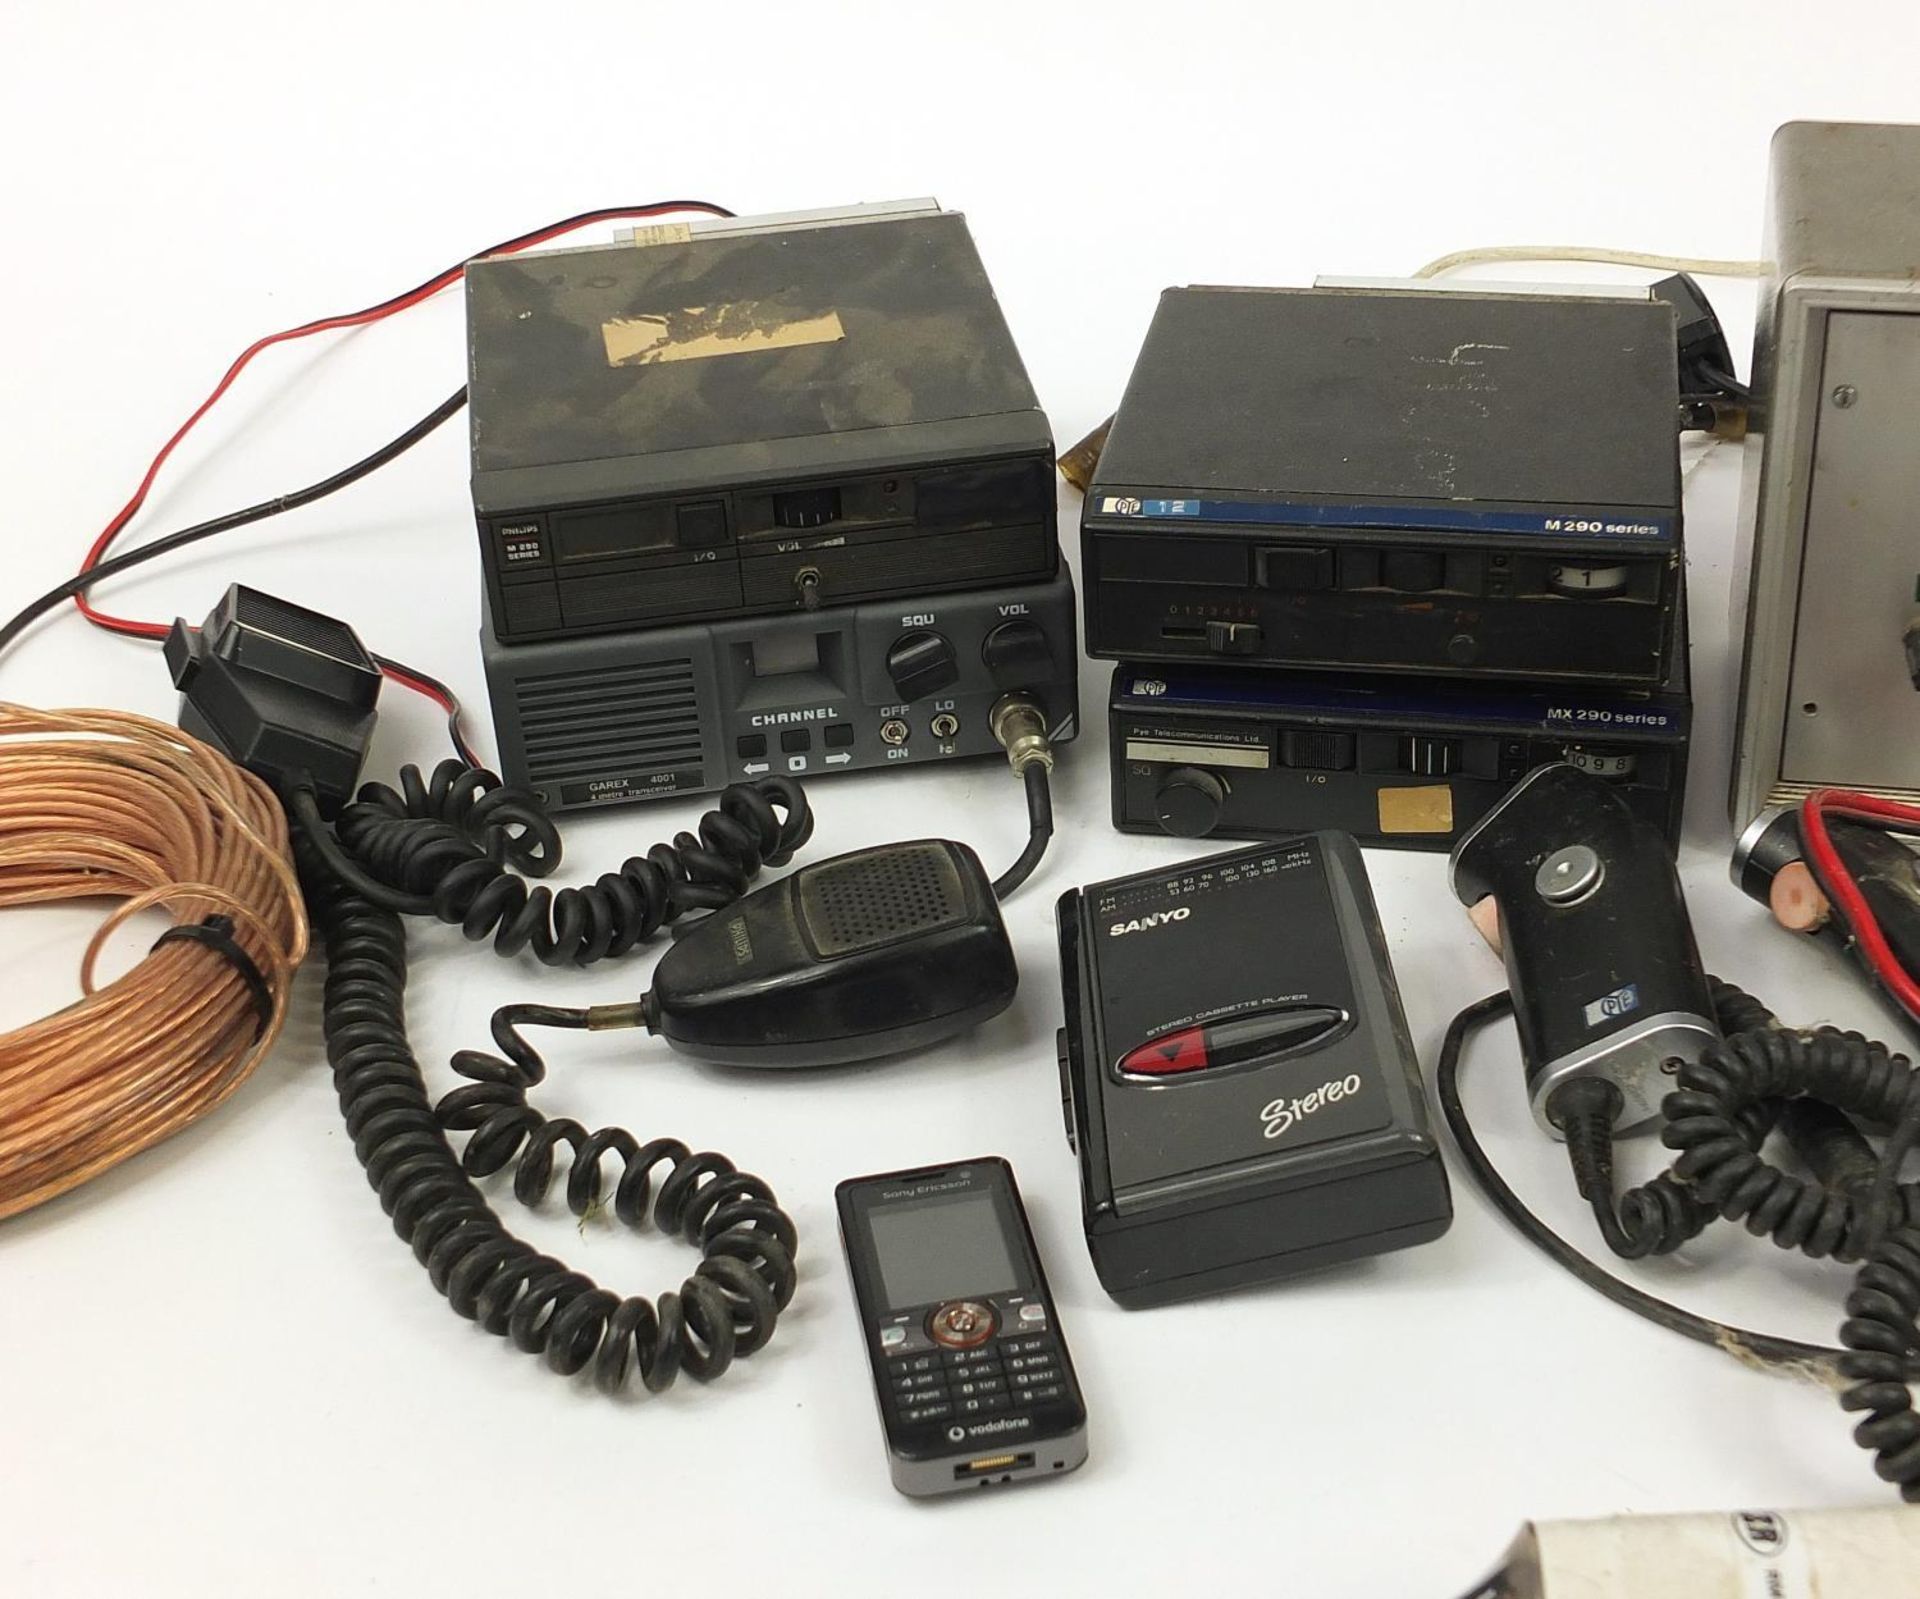 Vintage radio and other audio equipment including Pye M290 series, Garex 4001 transceiver and Jermyn - Image 3 of 6